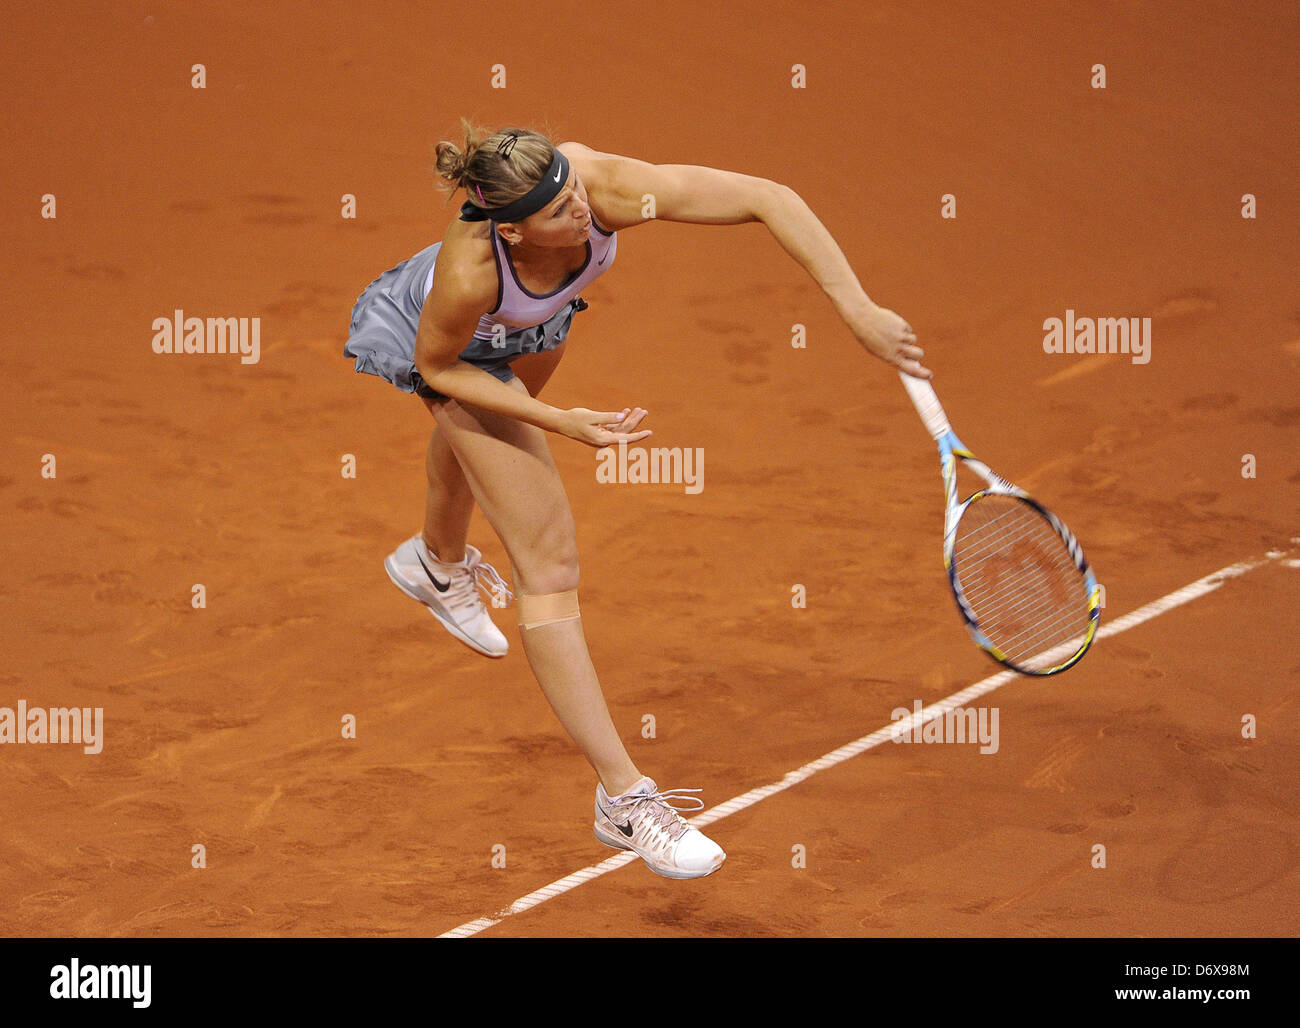 Lucie Safarova from the Czech Republic serves the ball during the first-round match of the WTA Tennis Grand Prix against Barthel from Germany at Porsche Arena in Stuttgart, Germany, 24 April 2013. Photo: DANIEL MAURER Stock Photo